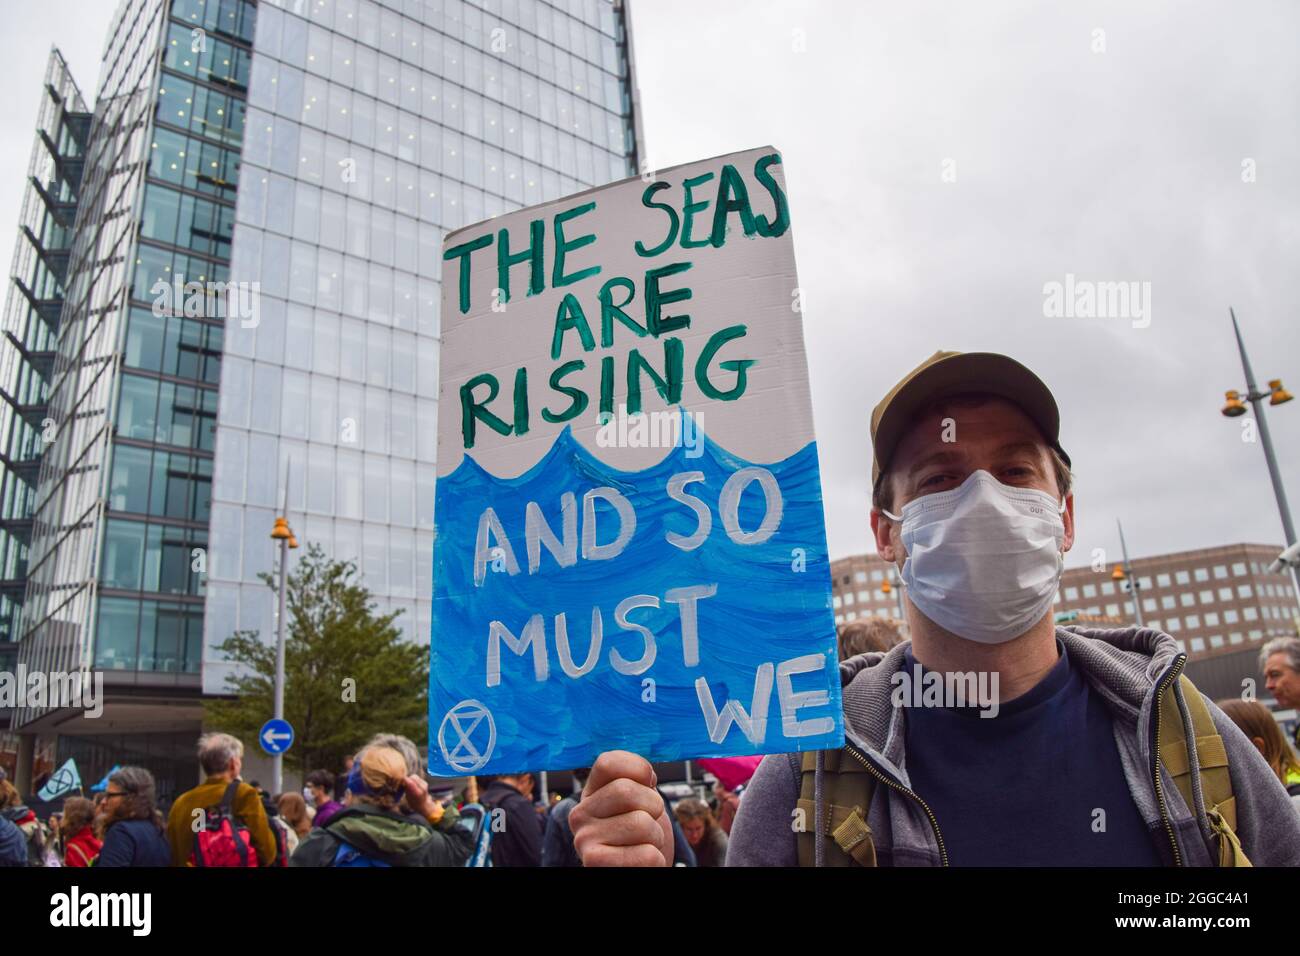 London, United Kingdom. 30th August 2021. Protesters outside Rupert Murdoch's News UK. Extinction Rebellion protesters marched from News UK to Tower Bridge as part of their two-week Impossible Rebellion campaign. (Credit: Vuk Valcic / Alamy Live News) Stock Photo